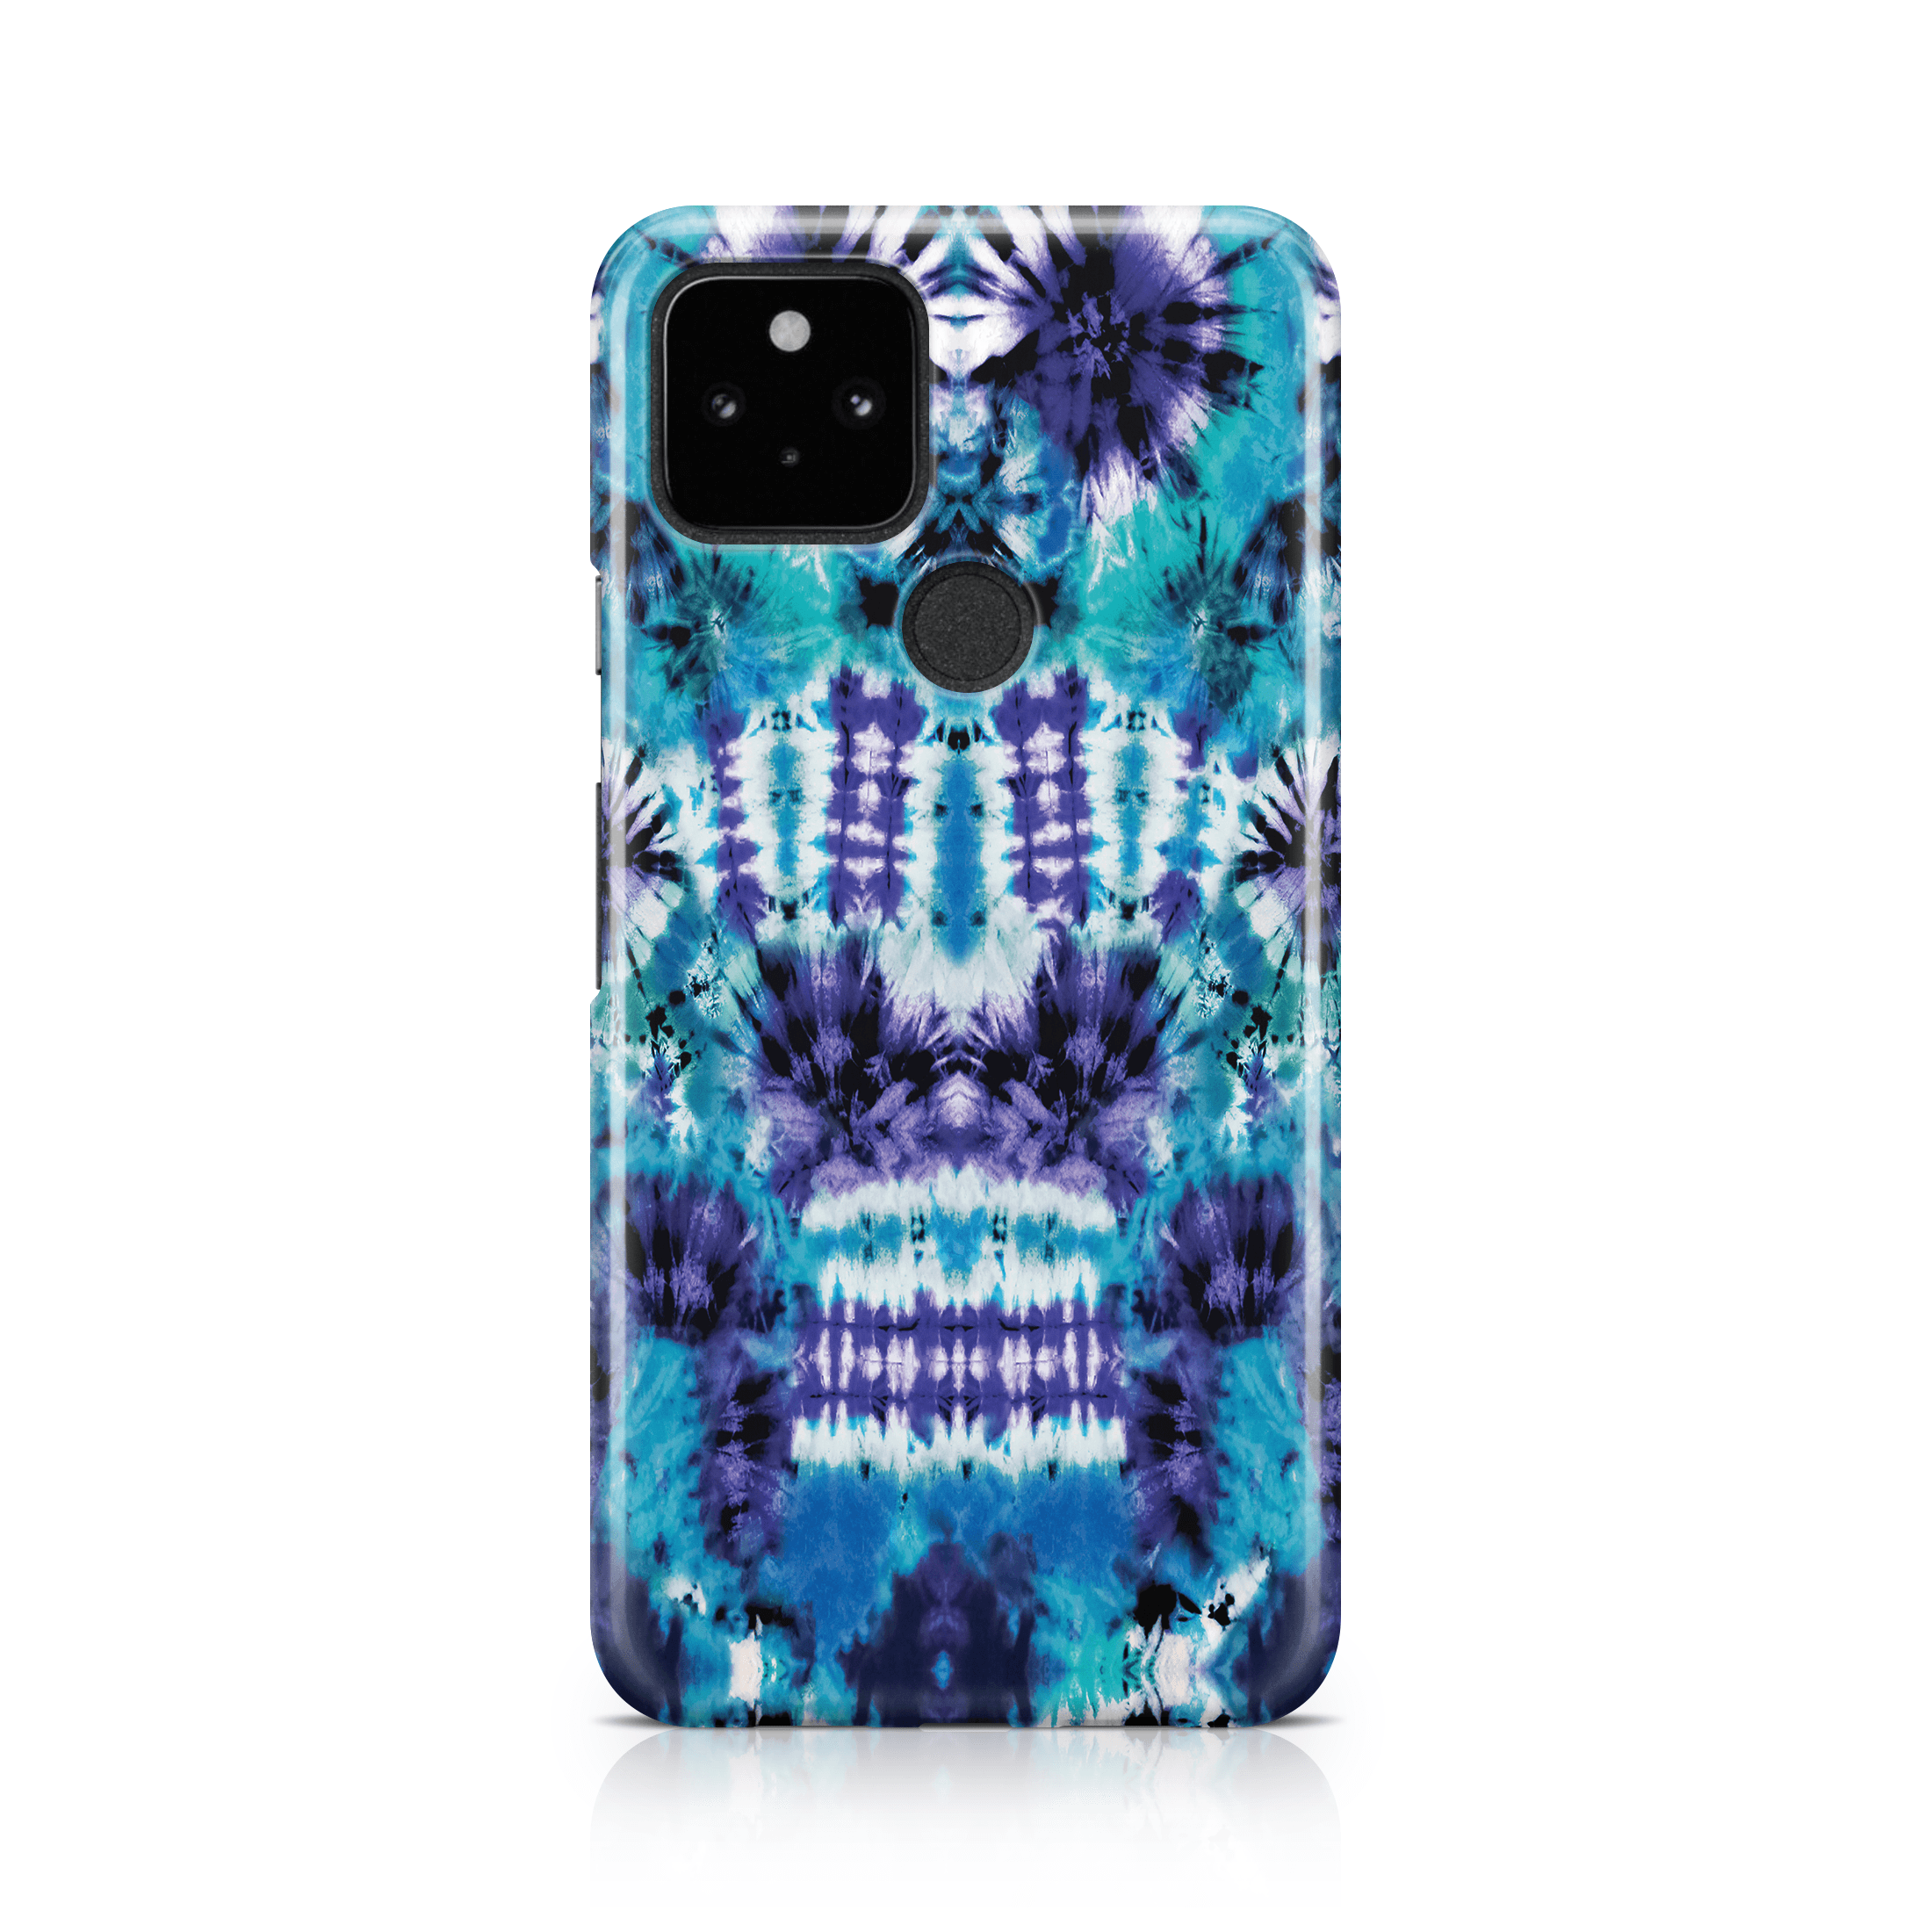 Blue Tie Dye - Google phone case designs by CaseSwagger